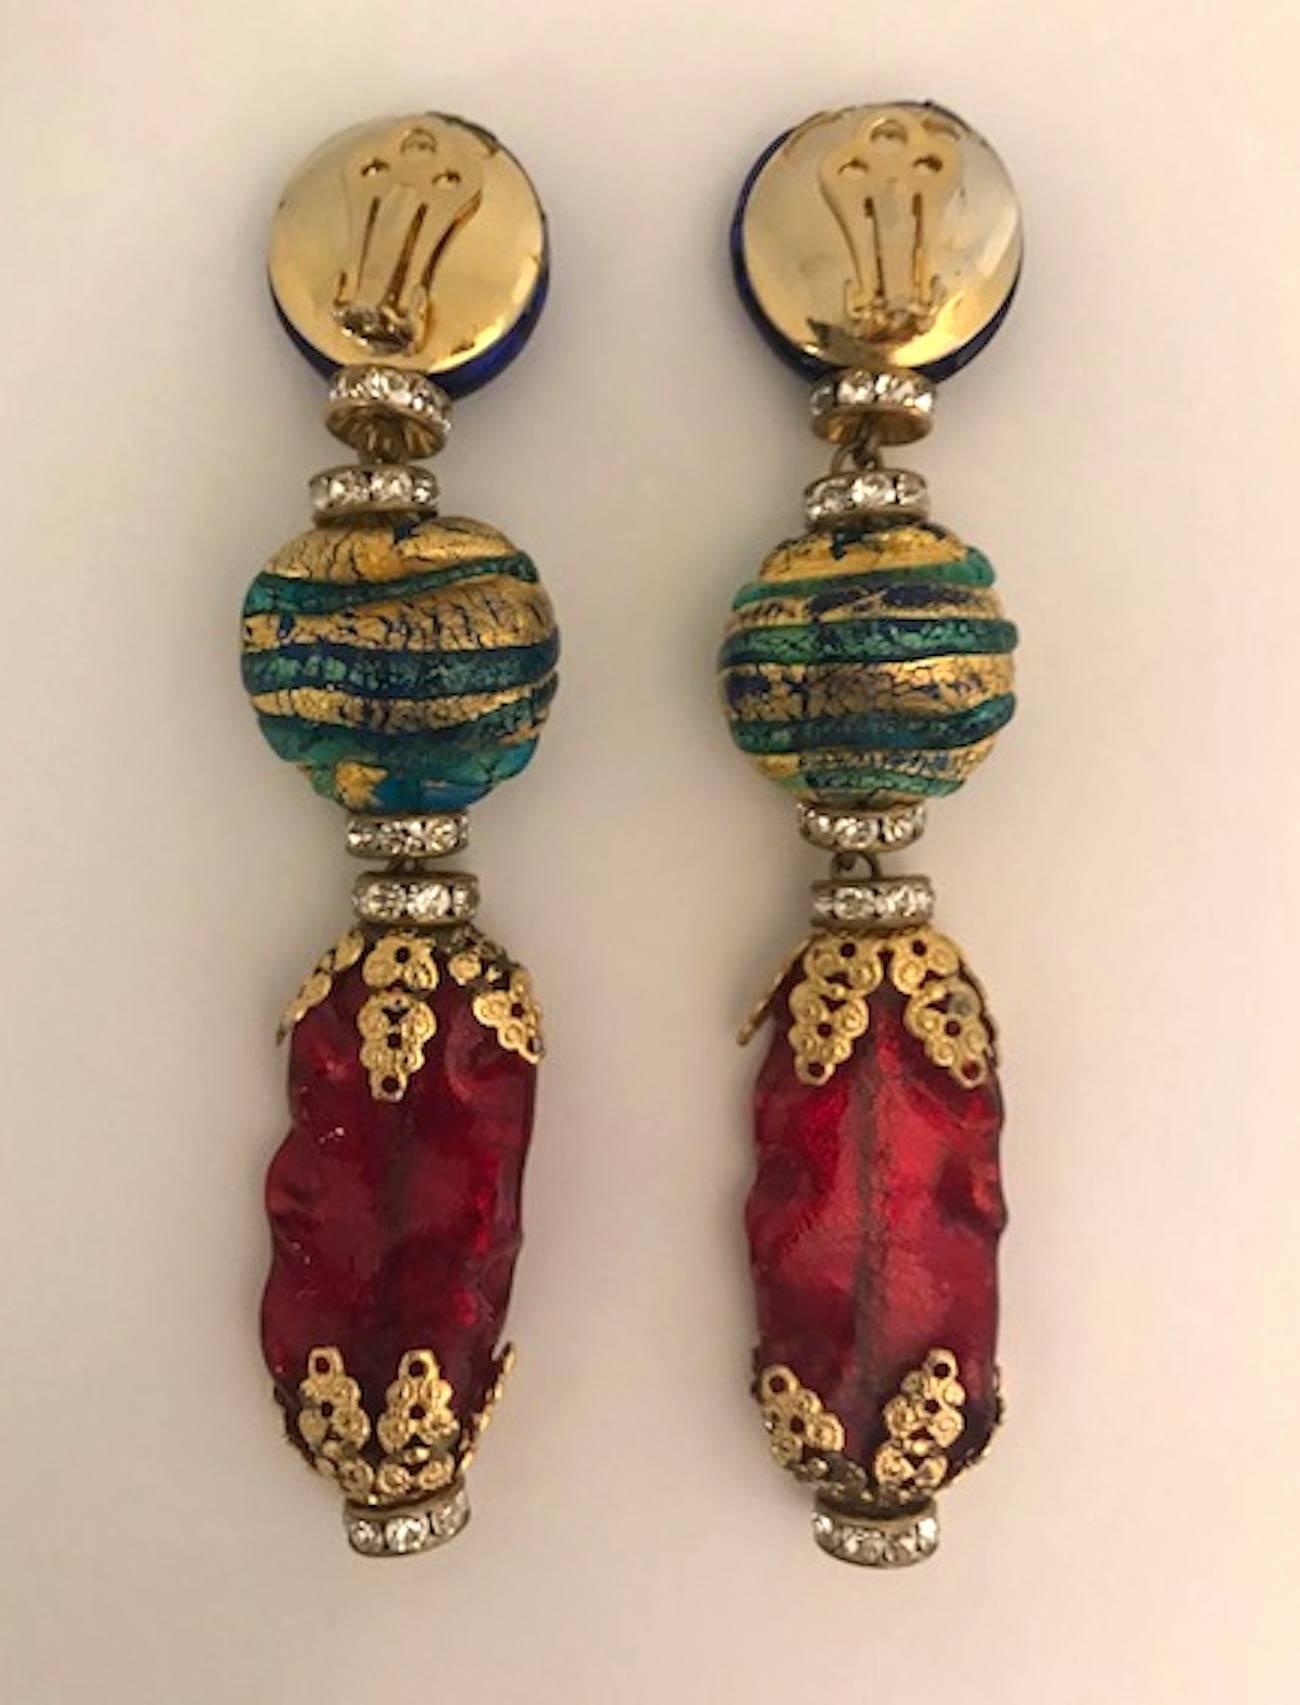 Baroque Revival Venetian glass bead earrings from actress Elsa Martinelli's personal collection